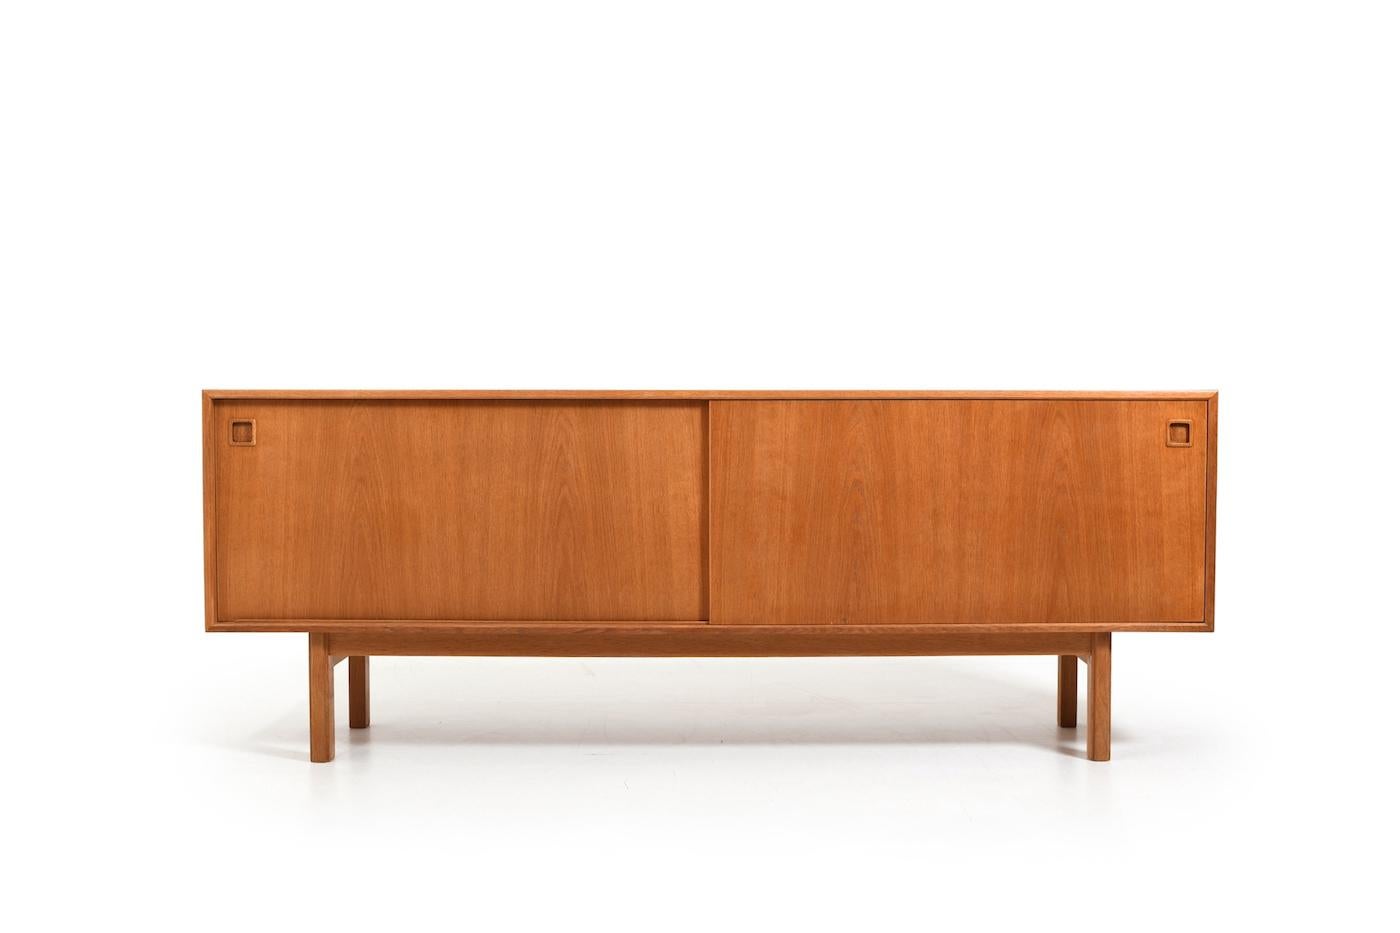 Omann Jun. sideboard, model no.21 in oak. In front with sliding doors and inside with shelfes and drawers. Denmark, 1960s. In very good vintage condition, with minor signes of age. Size: W. 210 cm / D. 47 cm  / H. 79 cm